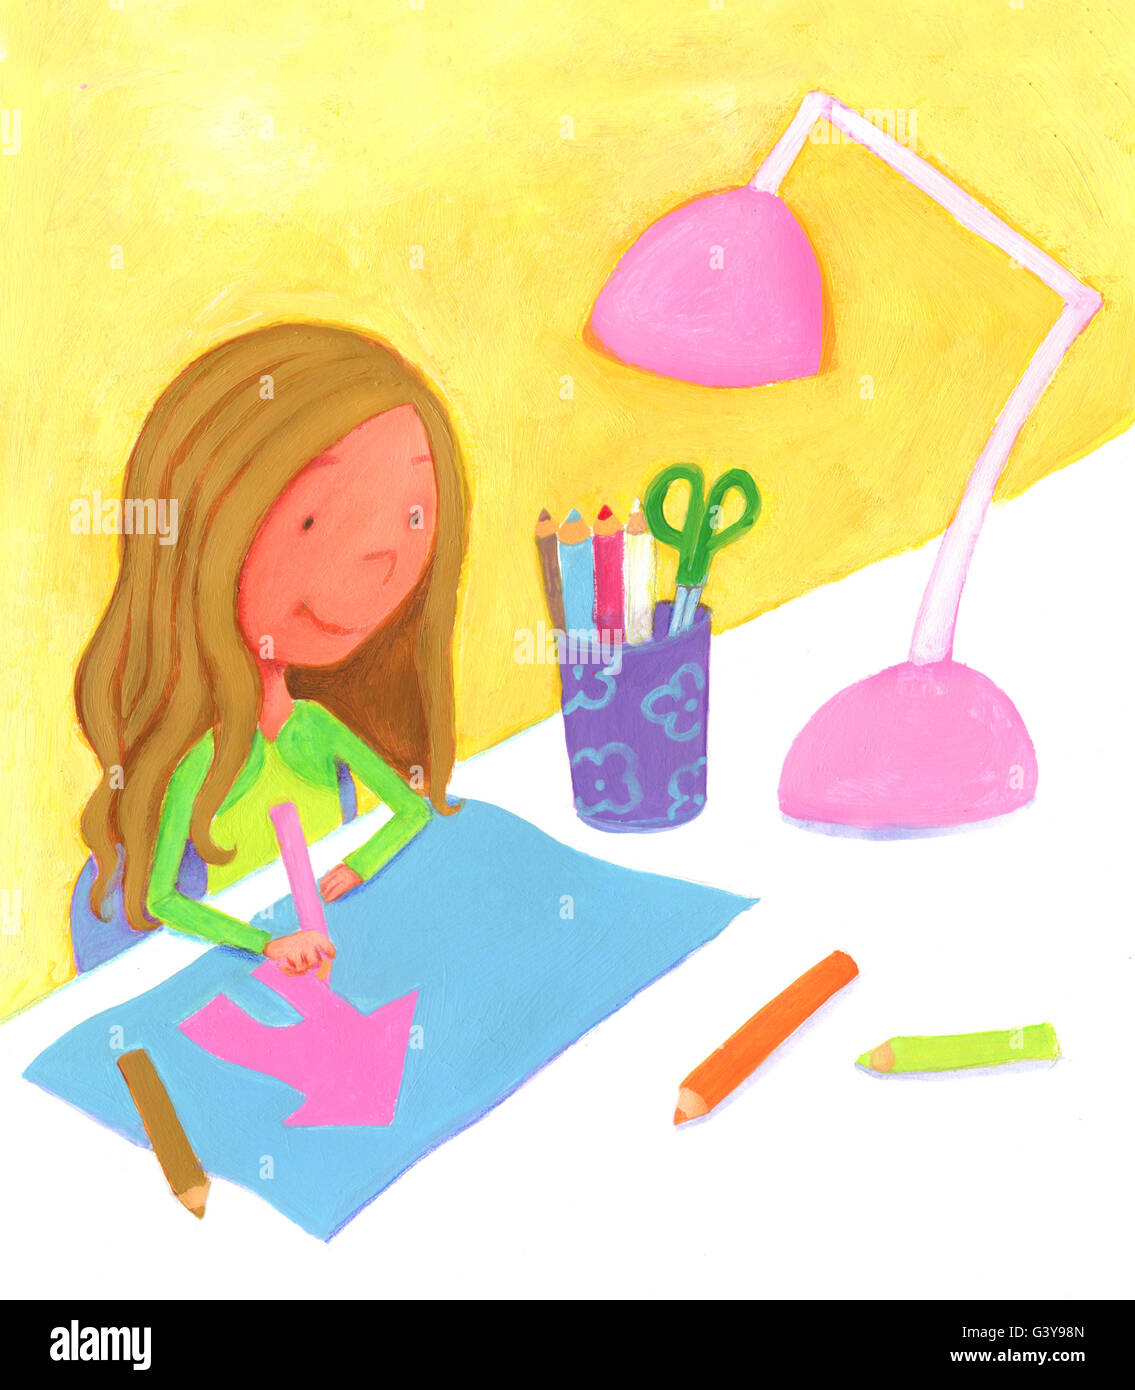 Girl sitting at her desk drawing with pencils a pink house Stock Photo